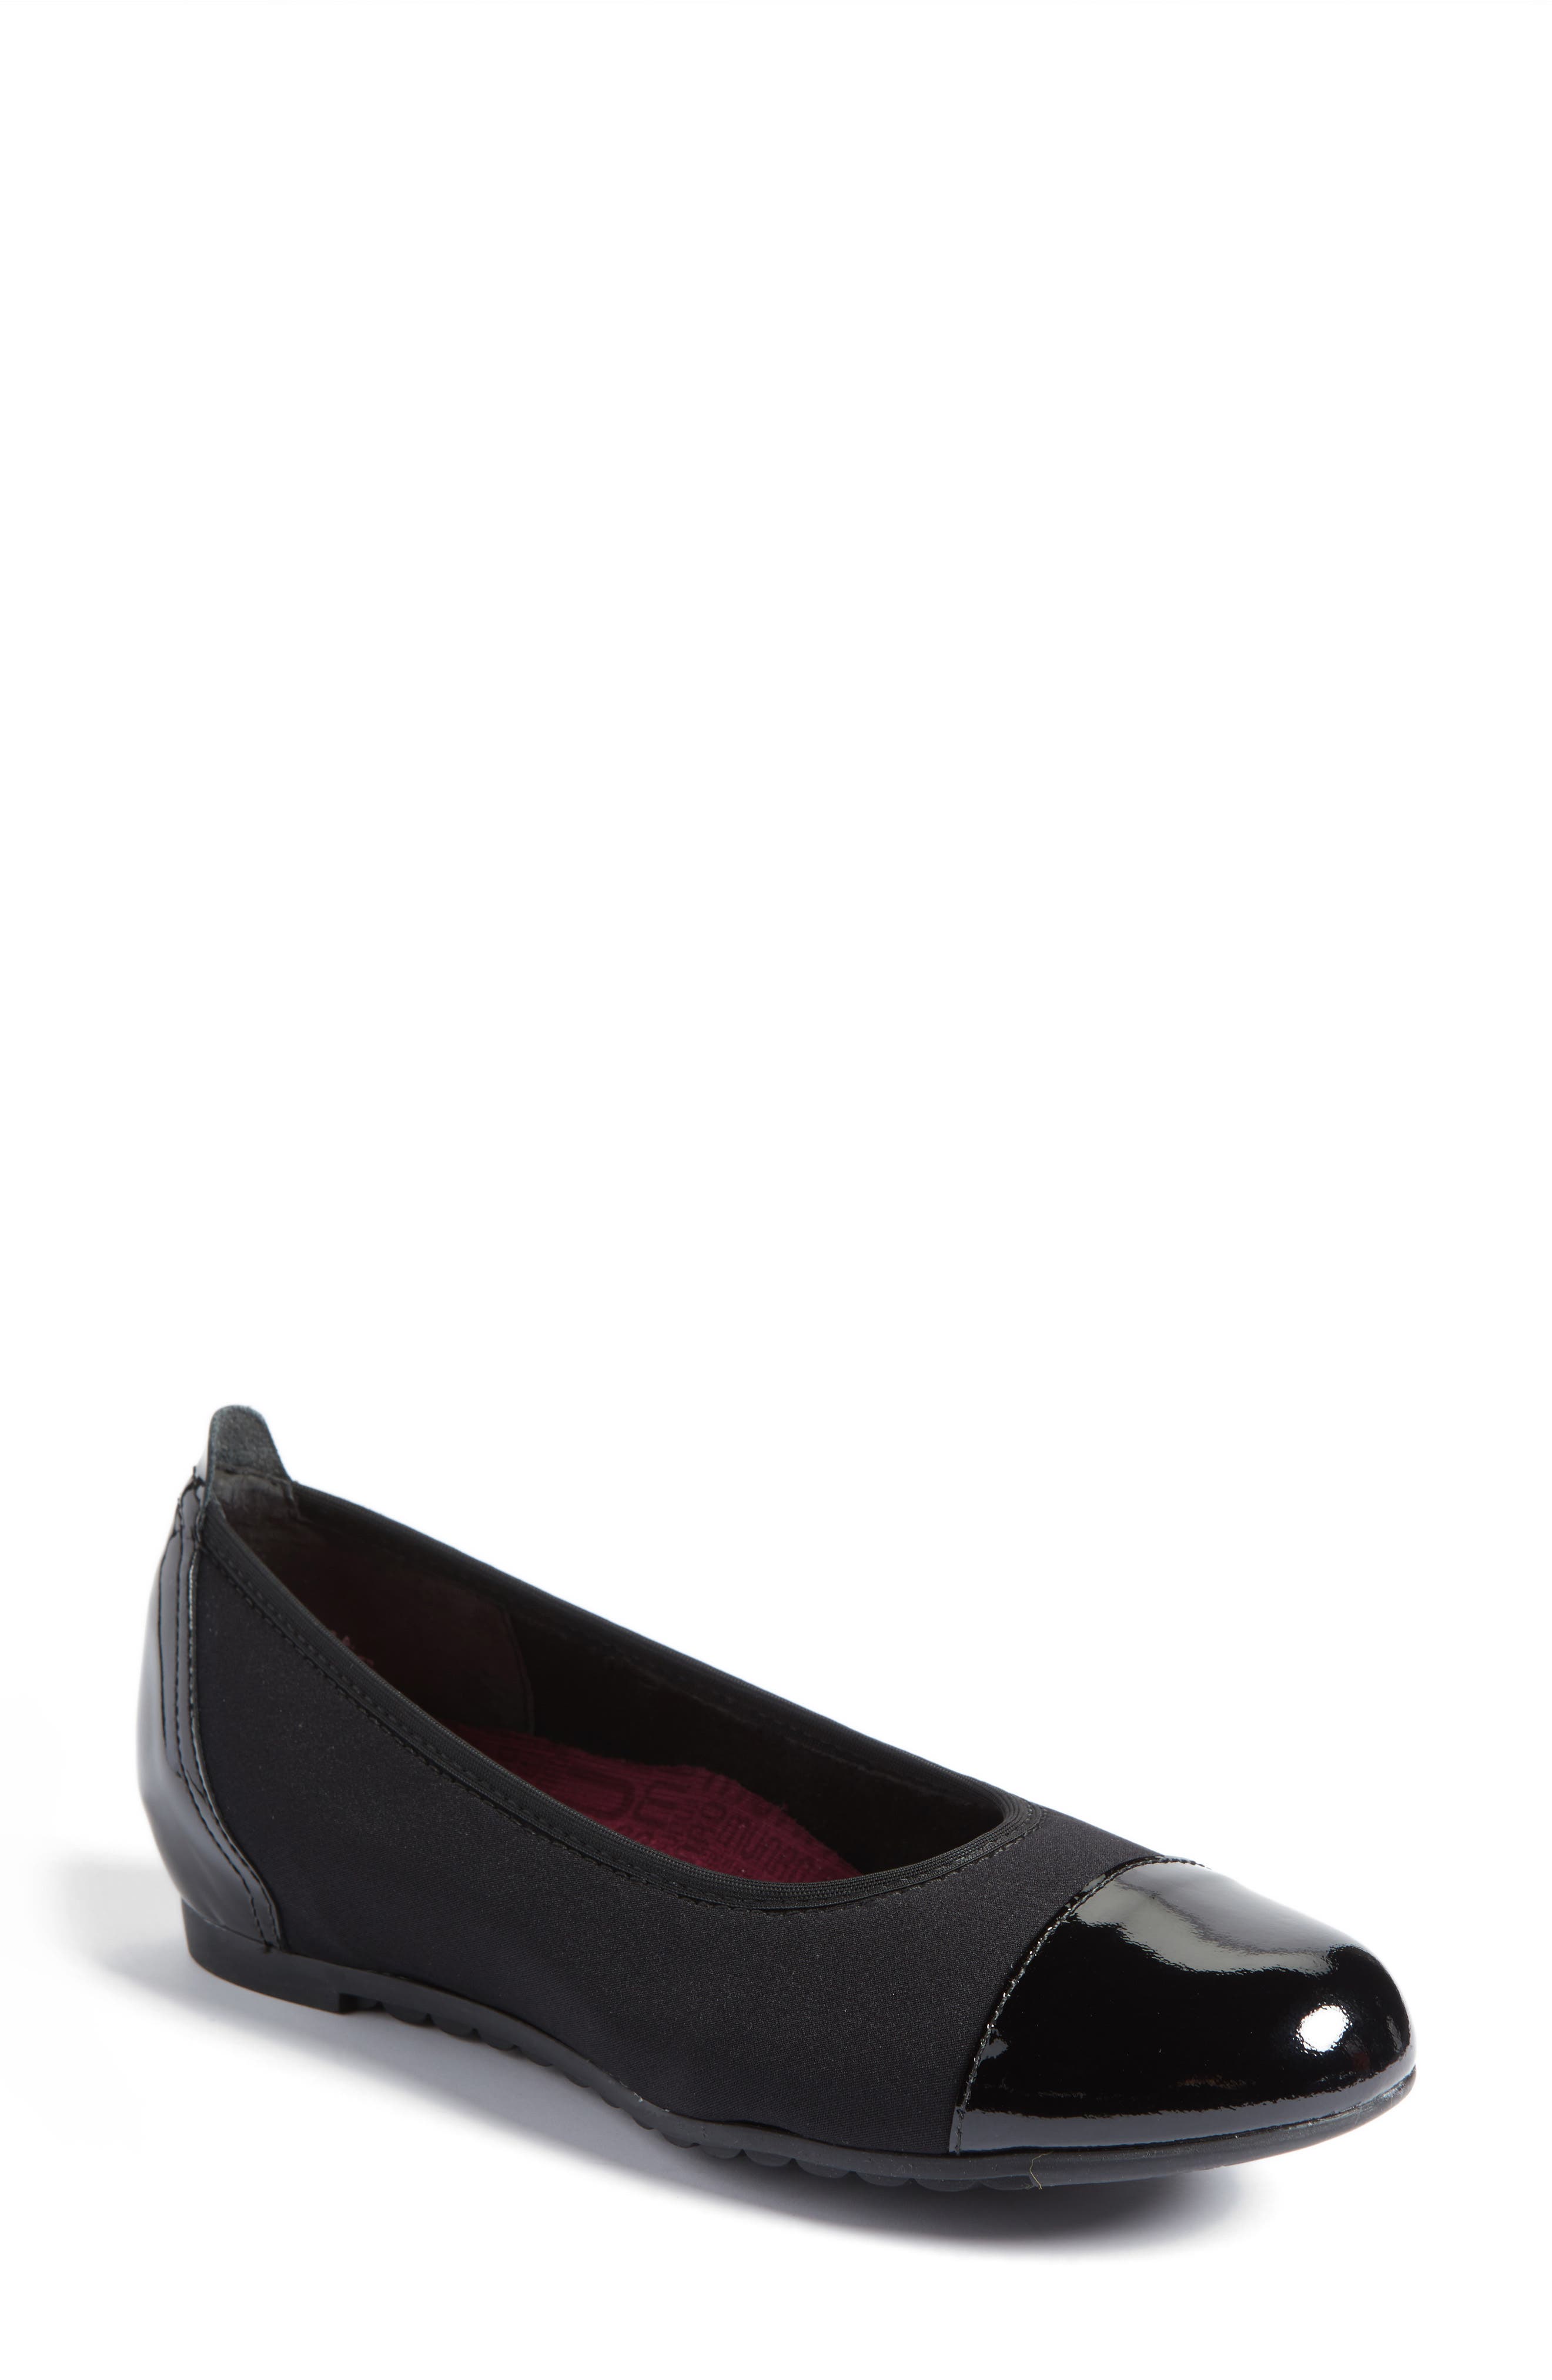 nordstrom munro women's shoes